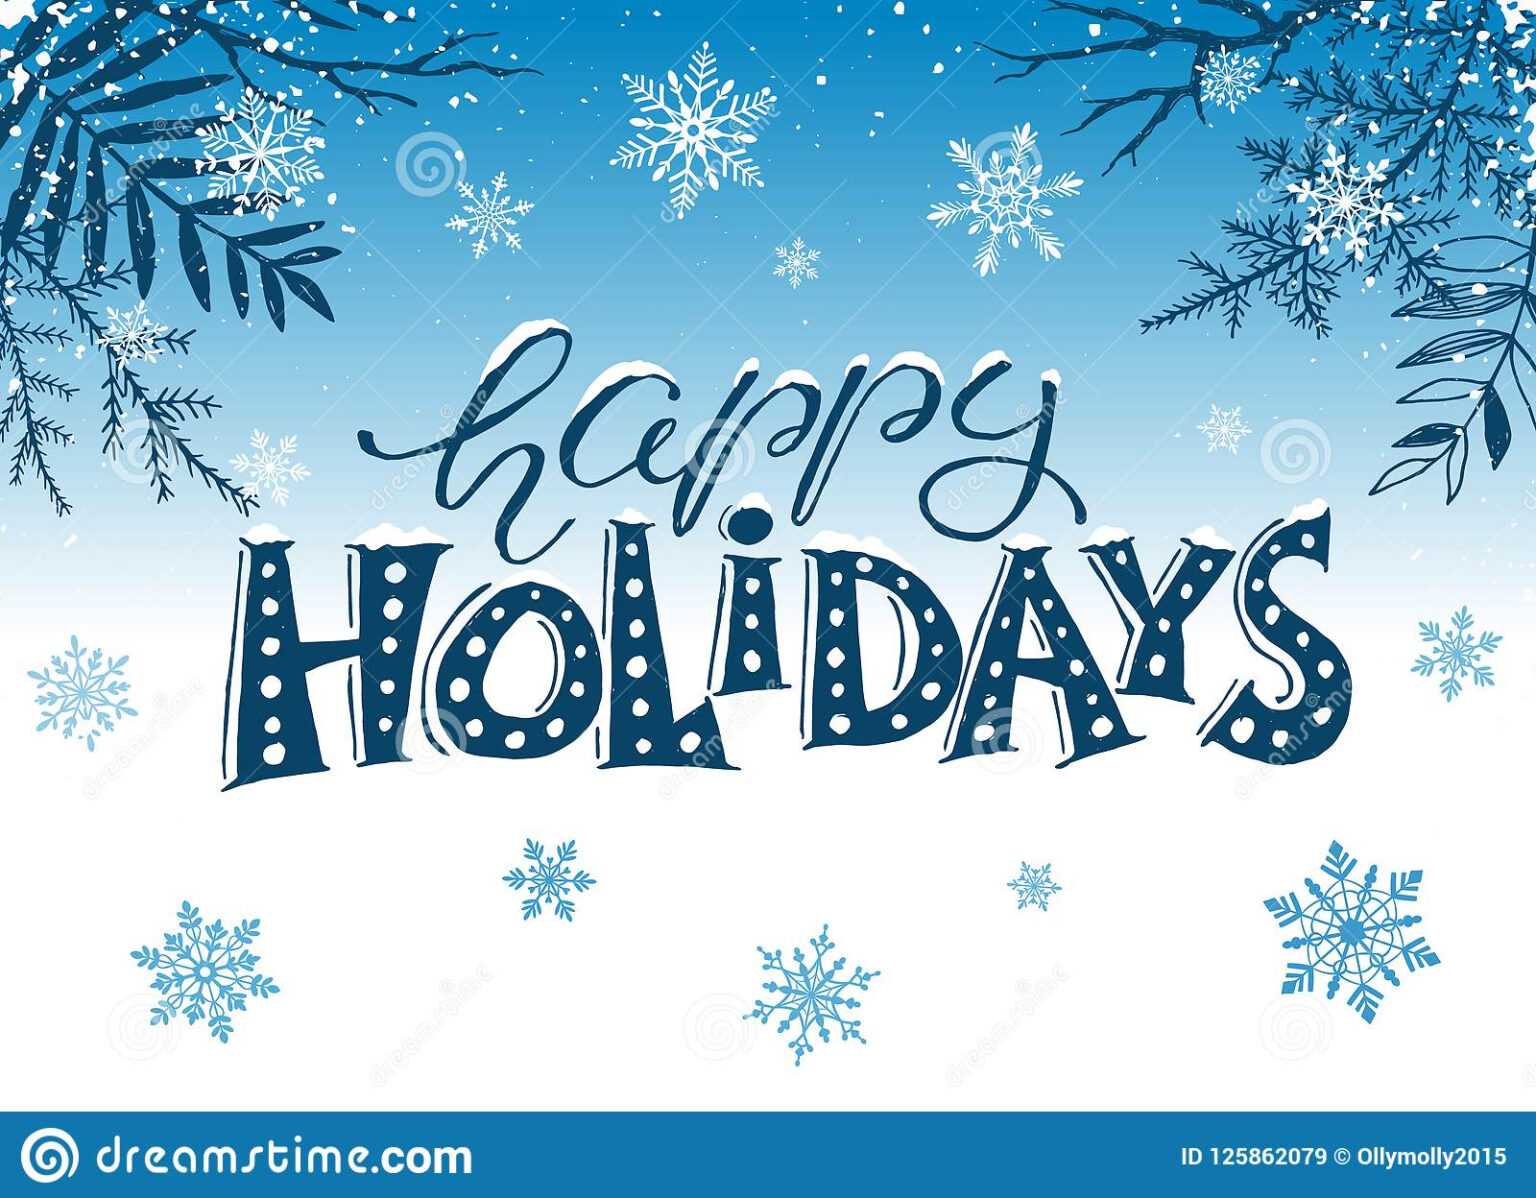 happy-holidays-card-template